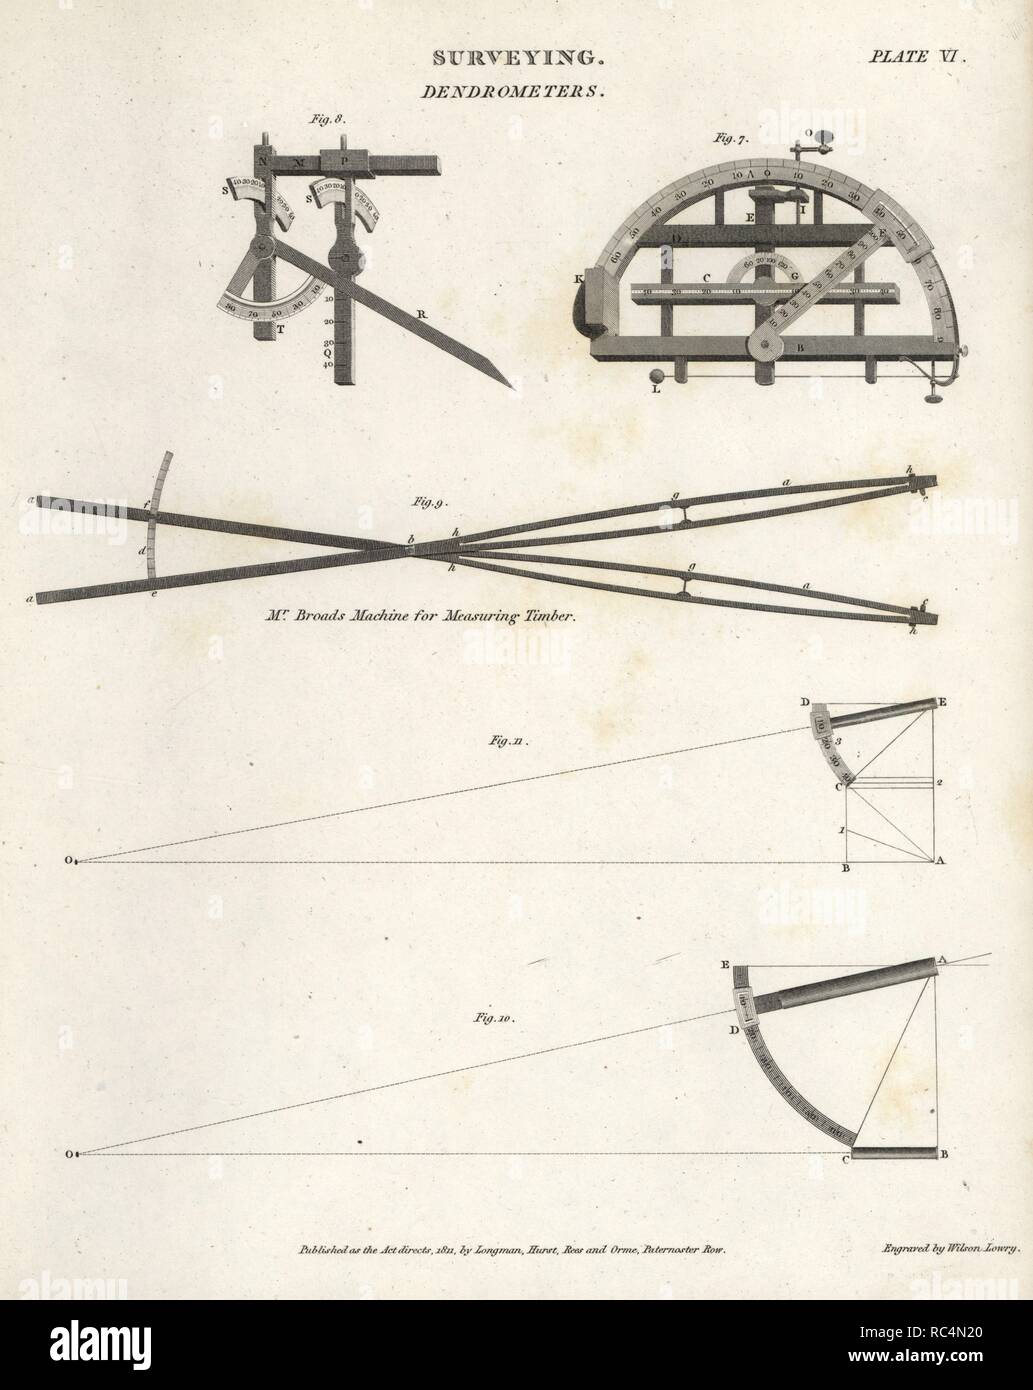 Surveying equipment from the 19th century: dendrometers and Mr. Broad's machine for measuring timber. Copperplate engraving by Wilson Lowry after an Illustration by J. Farey from Abraham Rees' 'Cyclopedia or Universal Dictionary,' London, 1811. Stock Photo